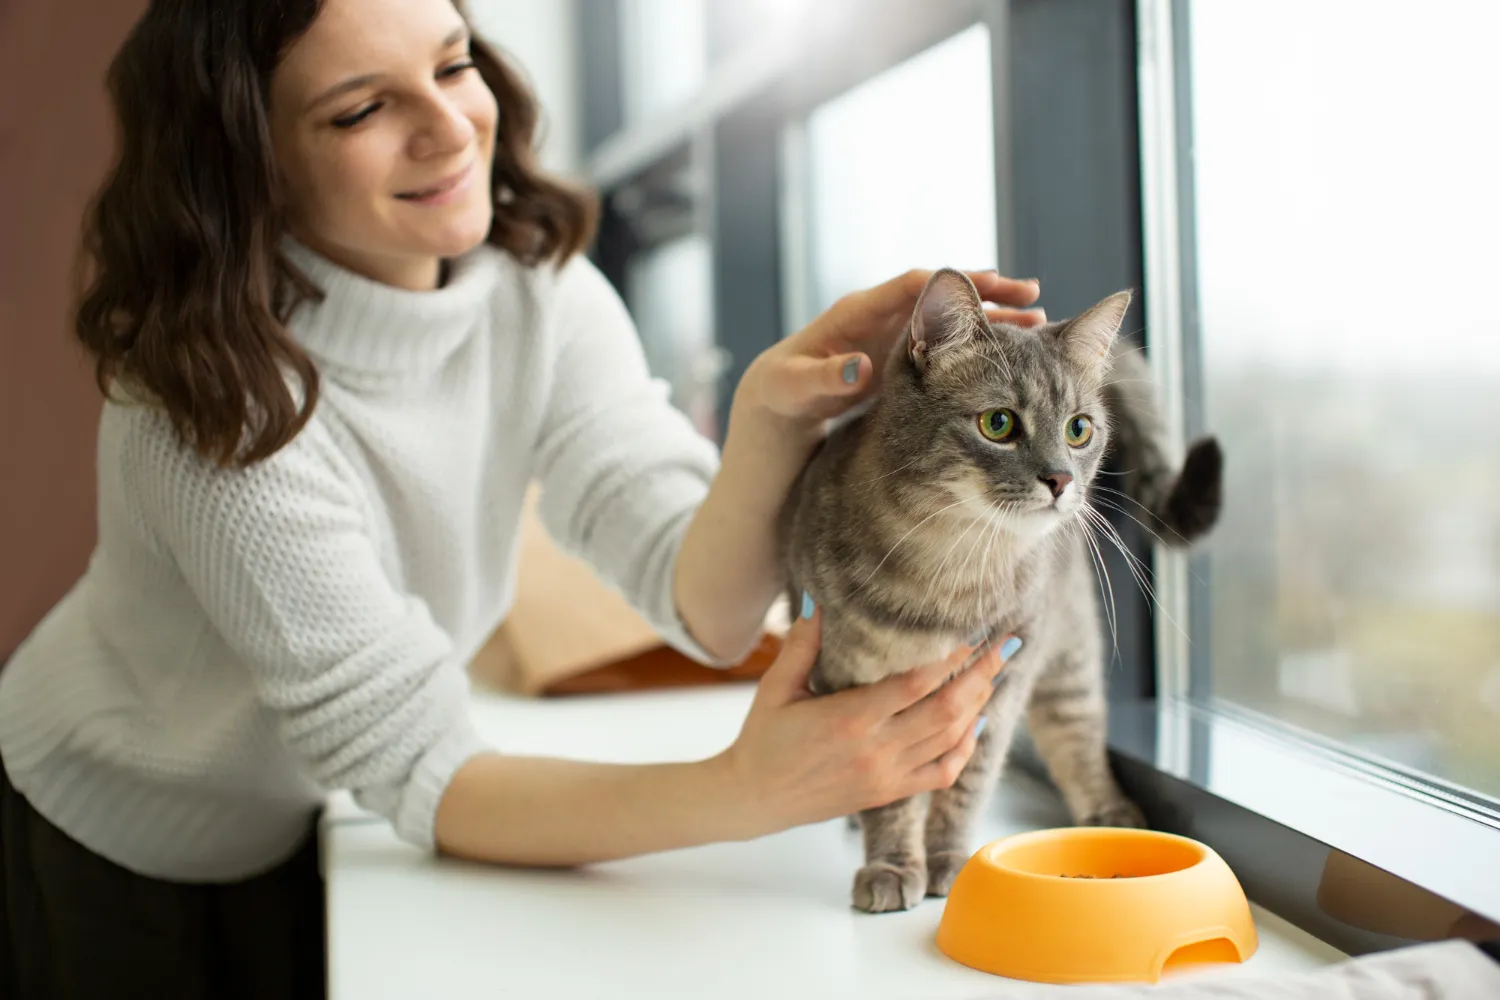 Better to keep your PET away from the kitchen to prevent hair contamination in your food